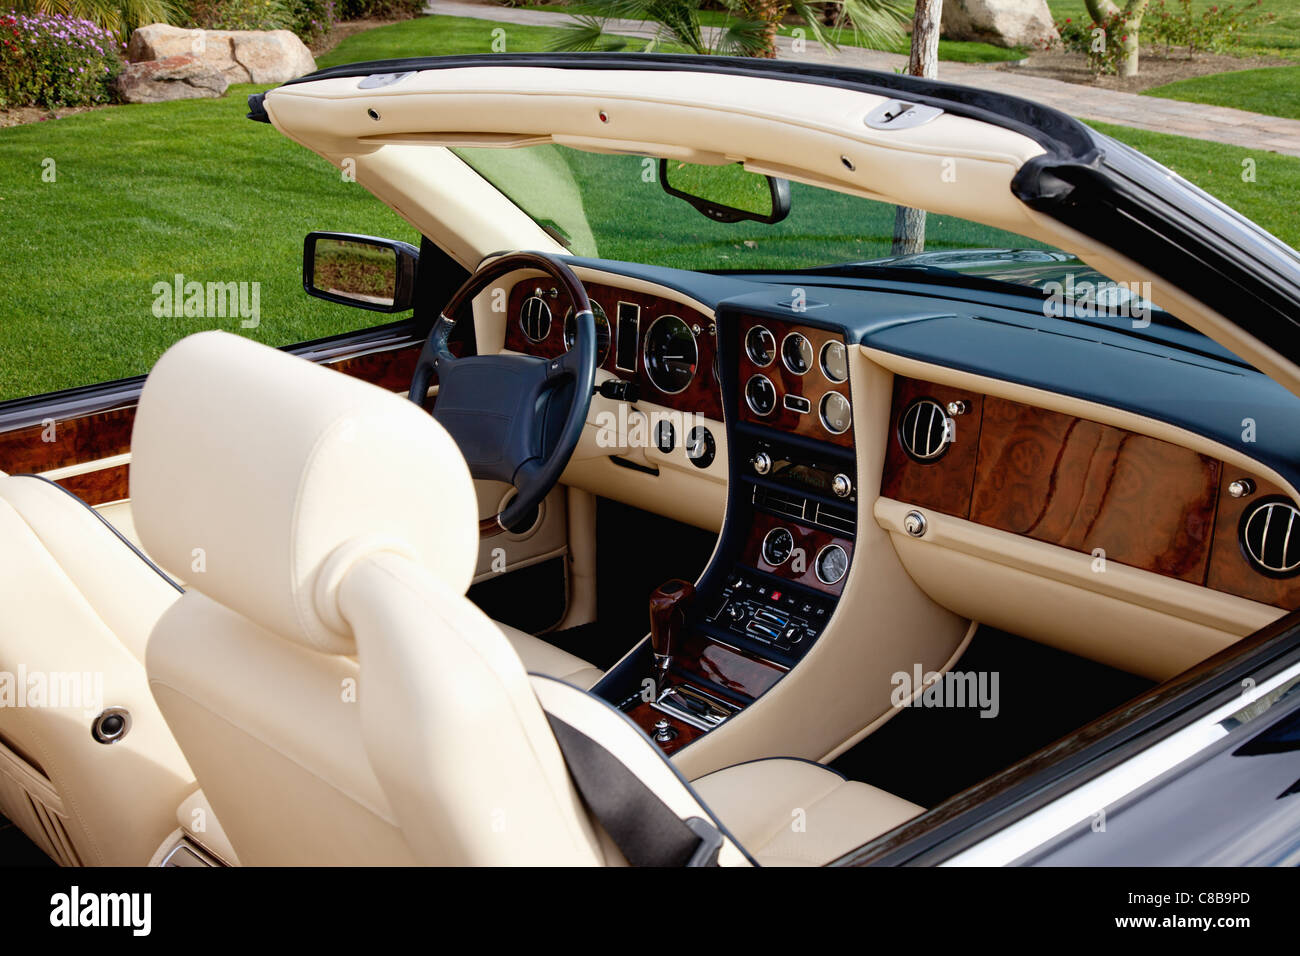 Close-up view of luxury car's interior with hi-tech dashboard Stock Photo